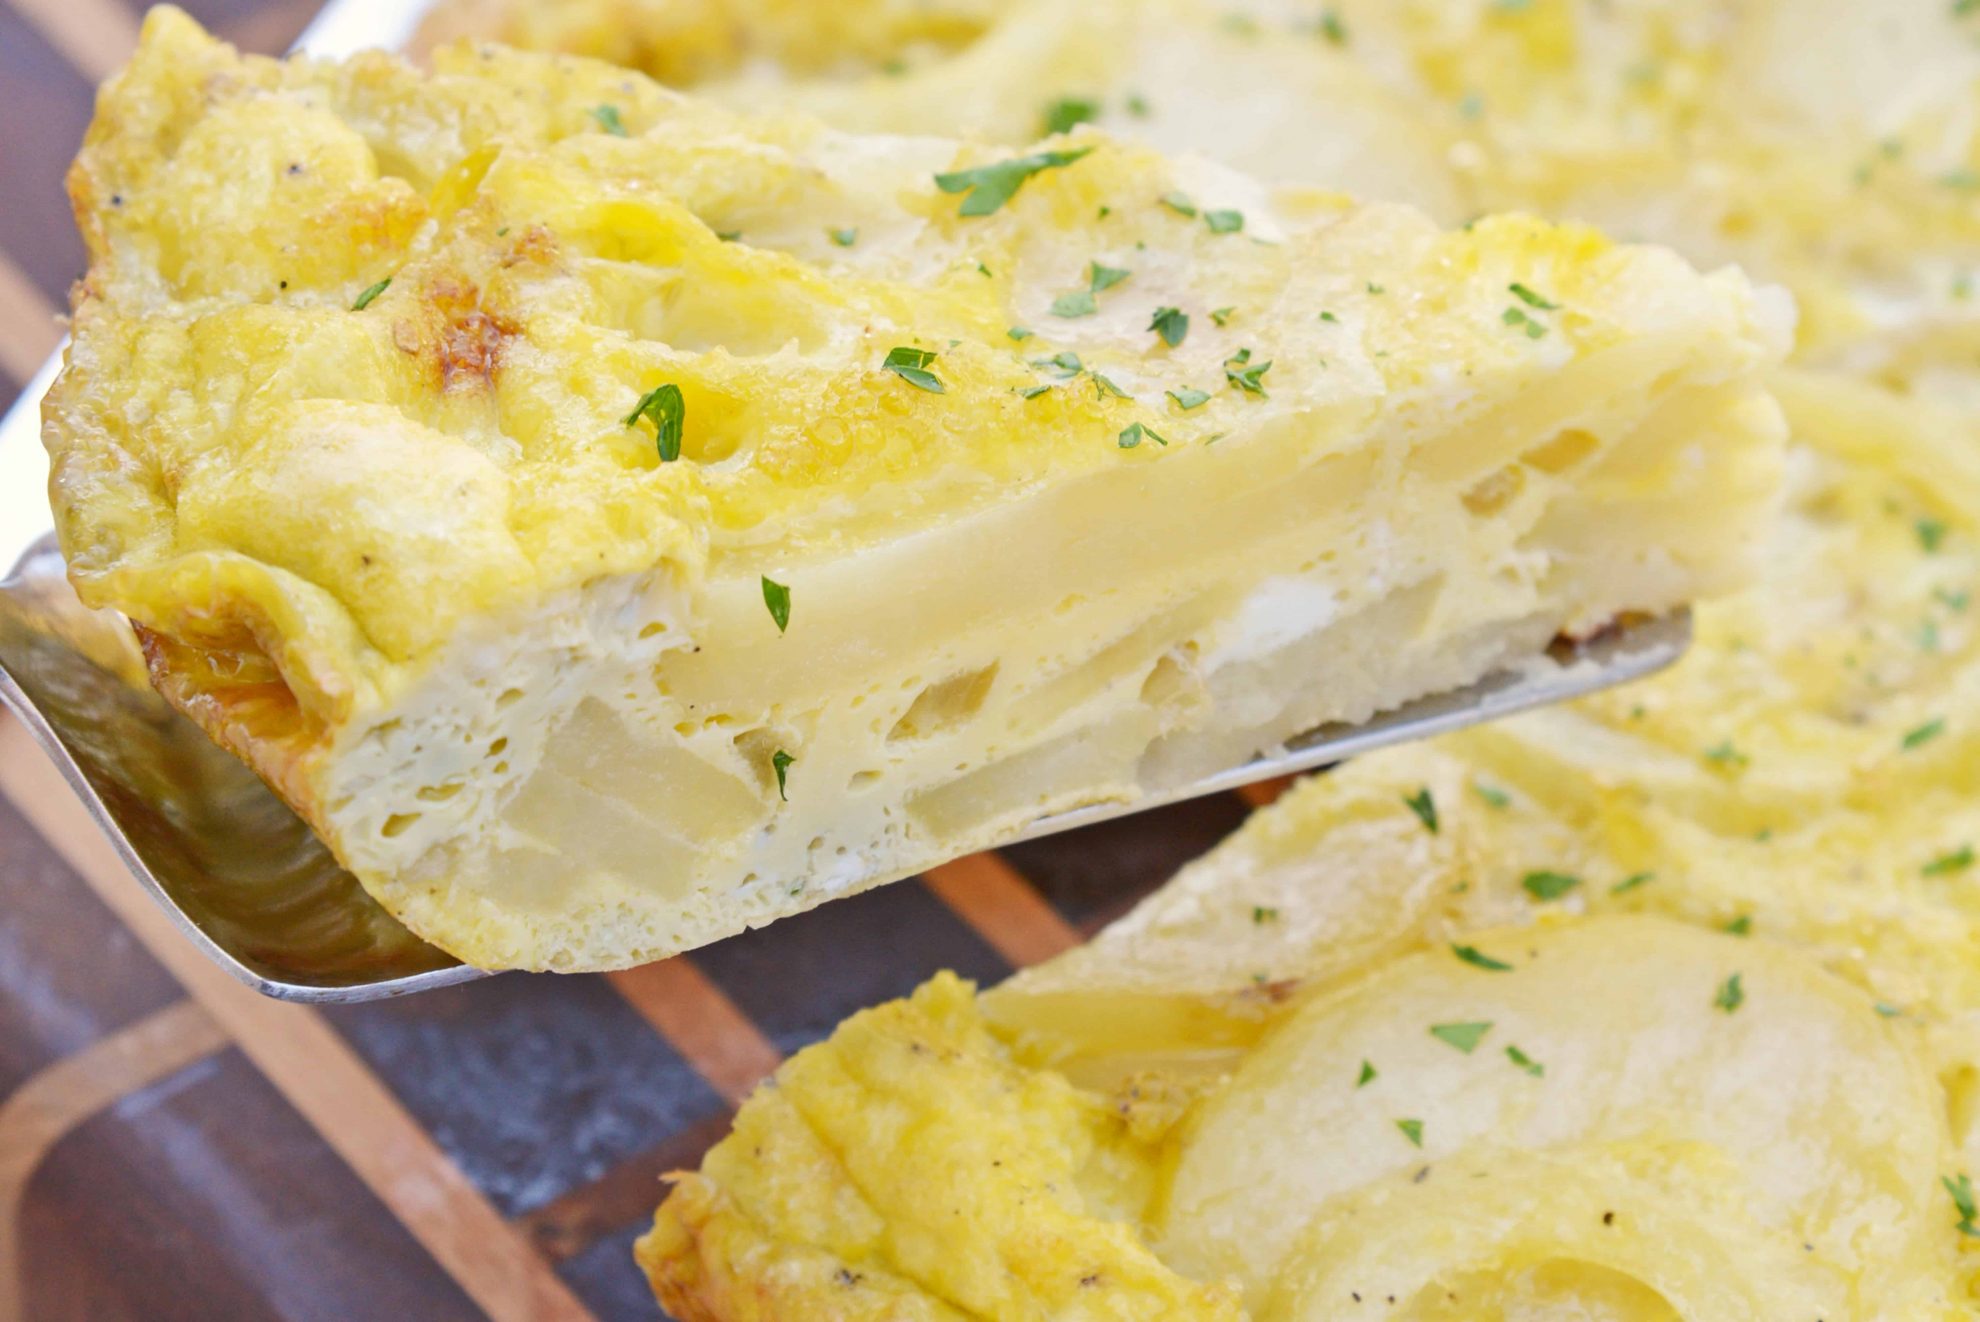 Tortilla Espanola, also known as Spanish Tortilla or Potato Tortilla, is a Spanish egg dish made with fried potatoes, onions and cheese. #tortillaespanola #spanishtortilla #potatotortilla www.savoryexperiments.com 